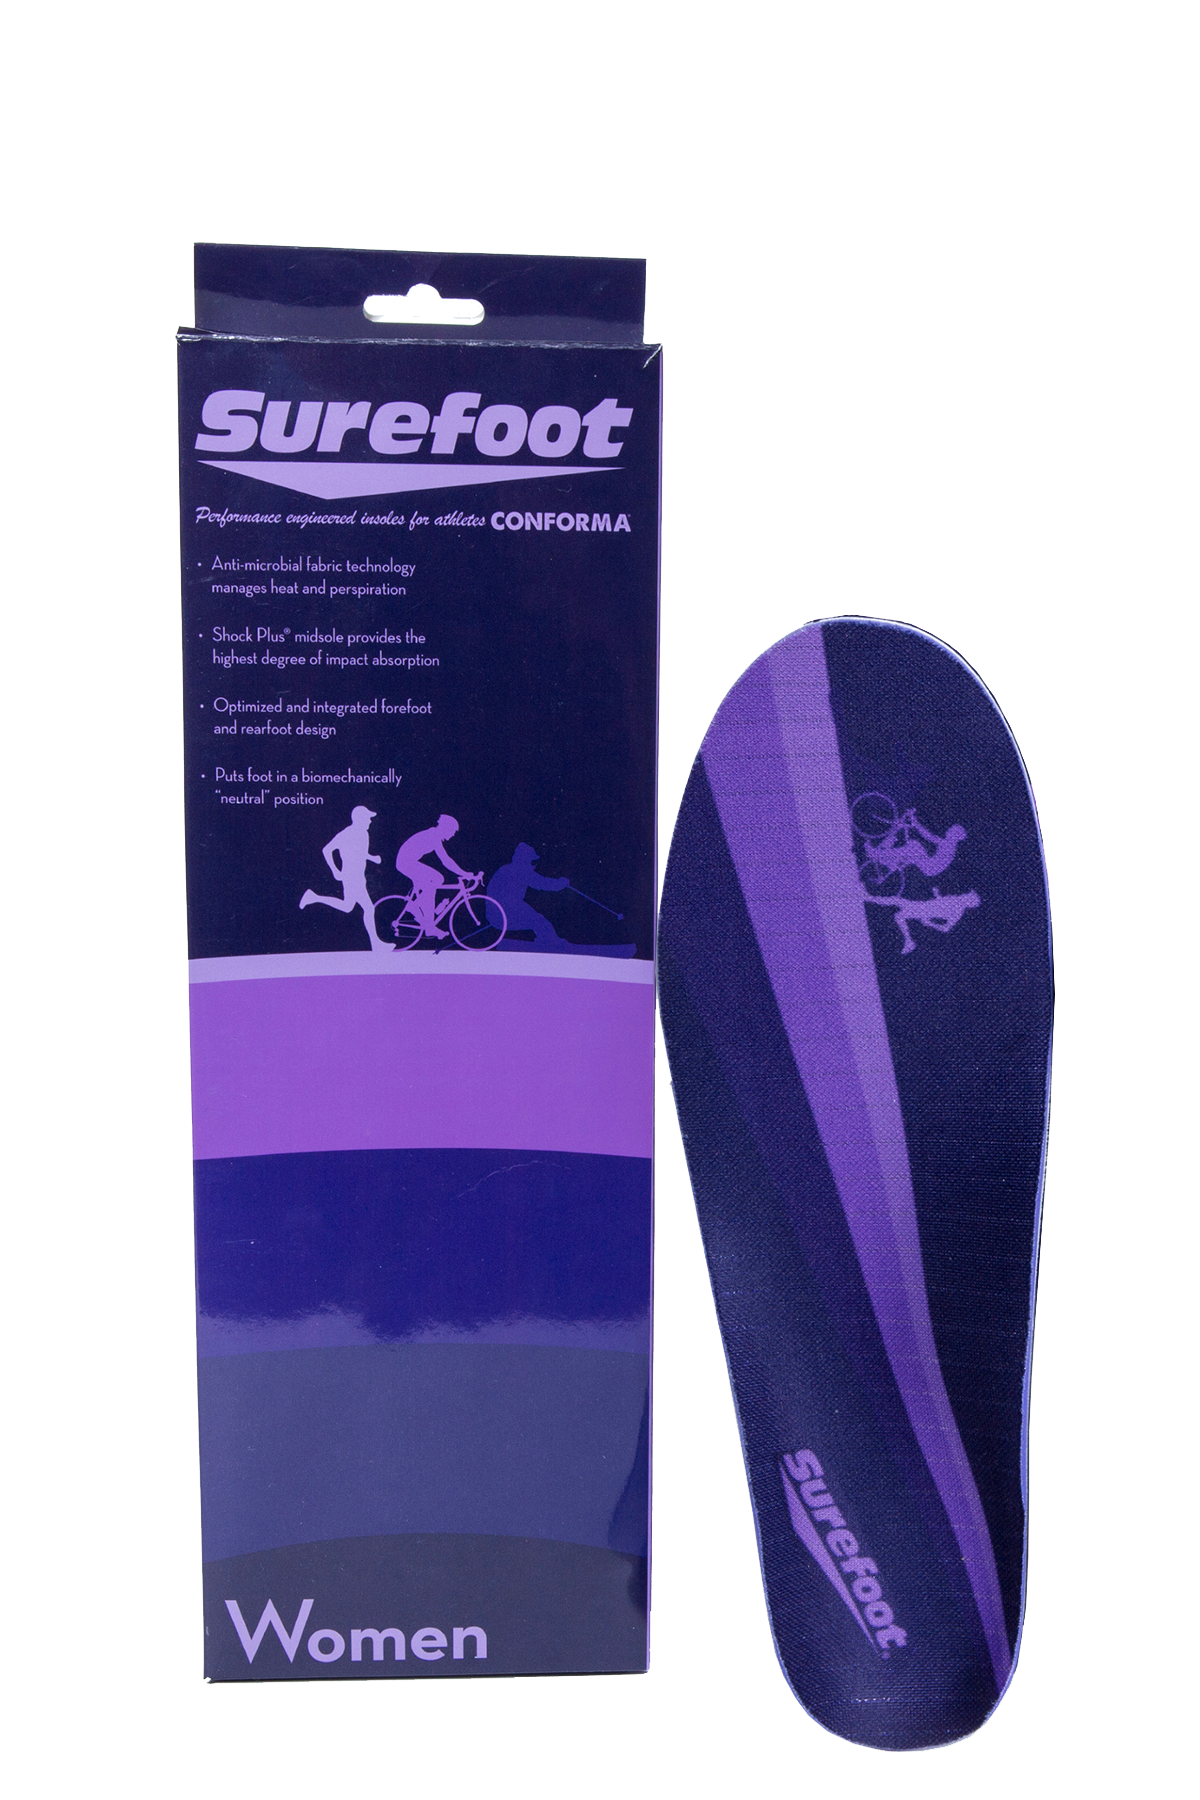 Image of the Women's Conforma Medio (medium arch for women) Insole by Surefoot and it's box in the color Purple